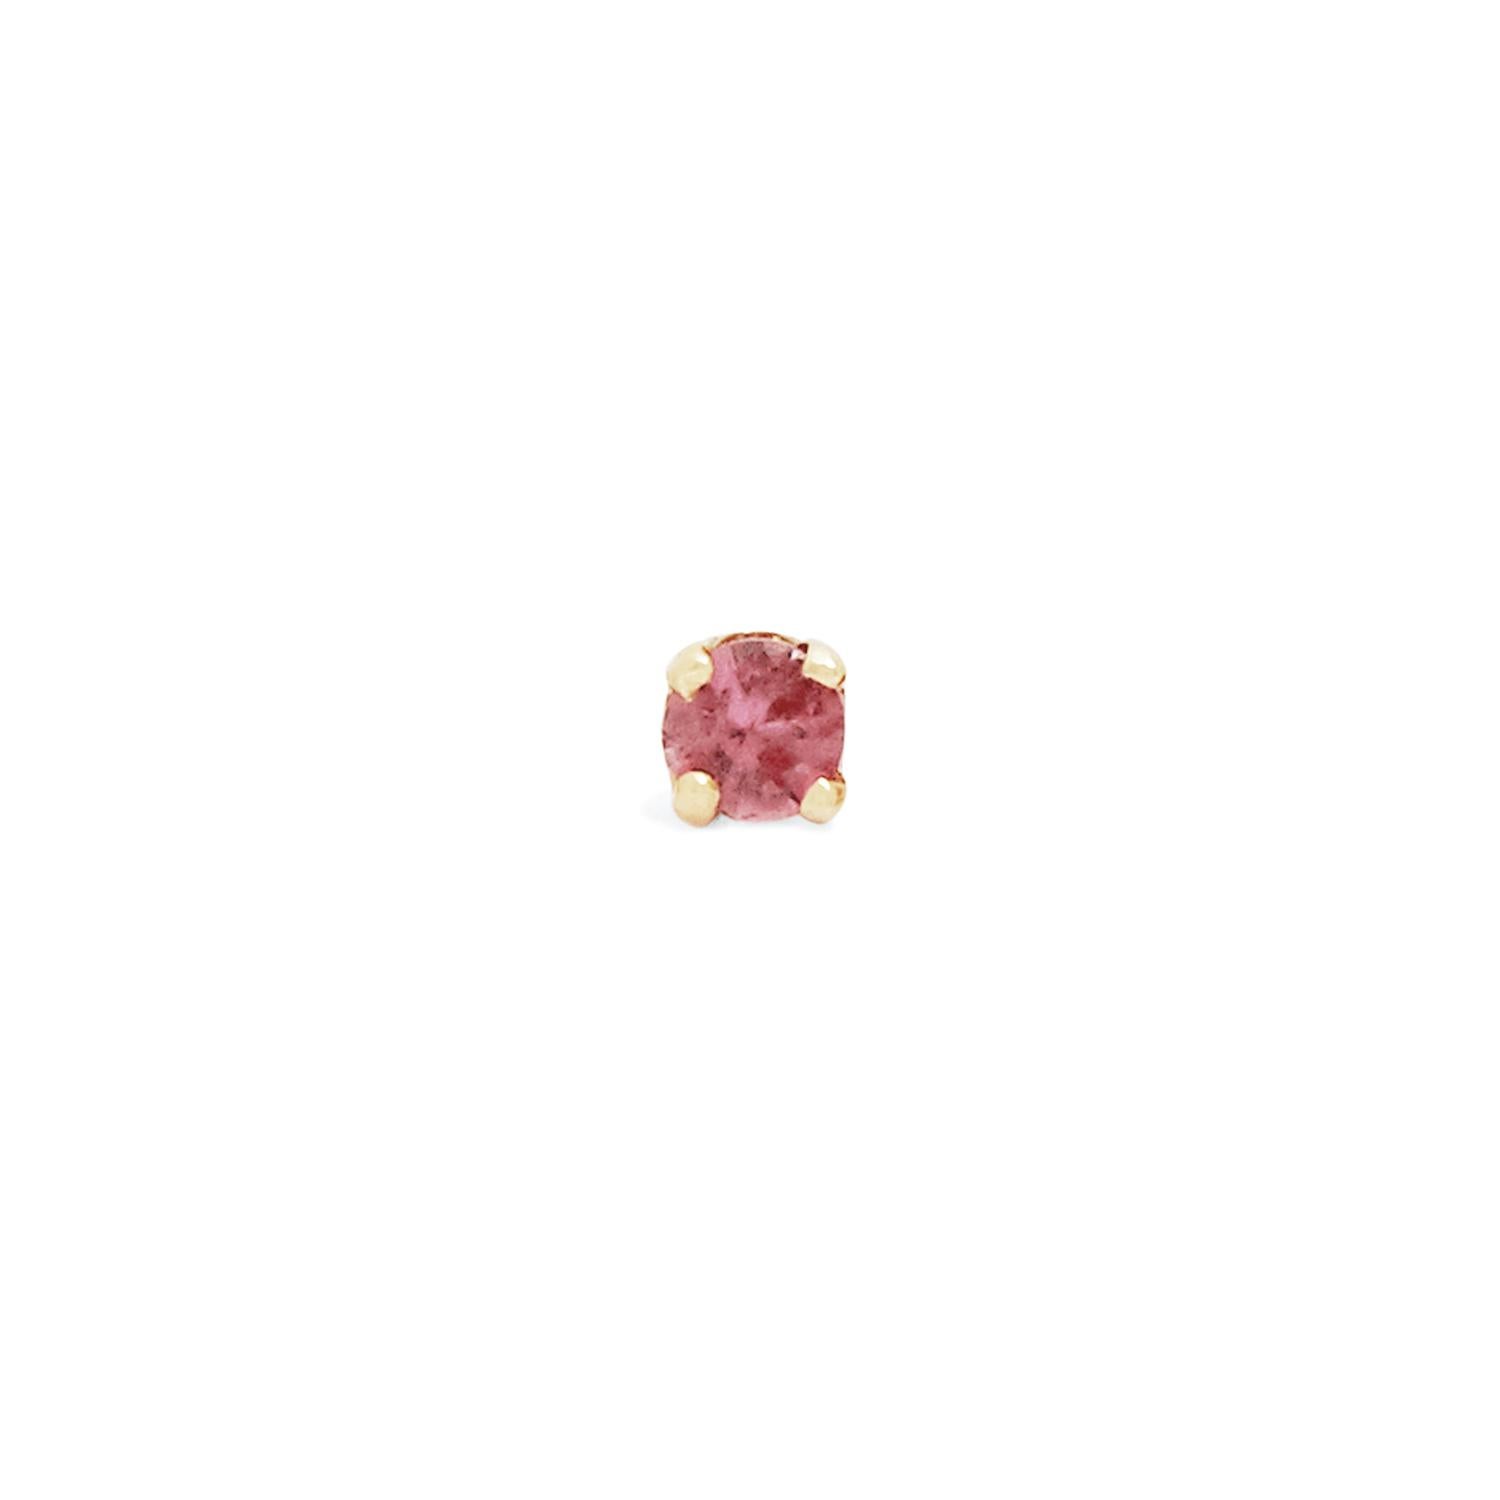 Women's Pair of Tiny Pink Sapphire and Solid Gold Studs by Allison Bryan